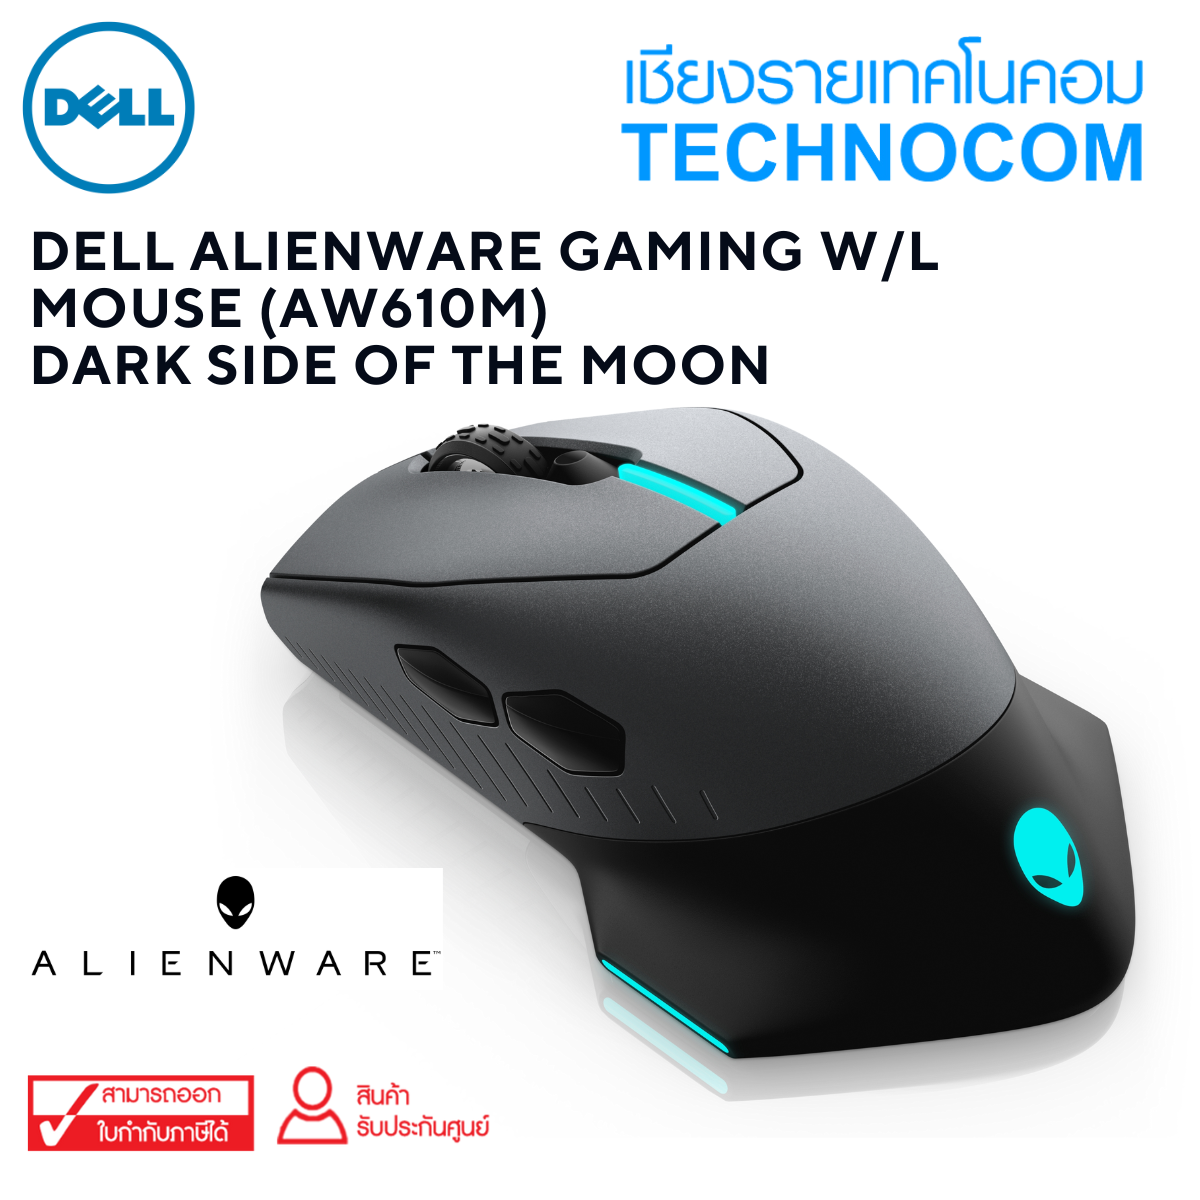 DELL ALIENWARE GAMING W/L MOUSE (AW610M) DARK SIDE OF THE MOON